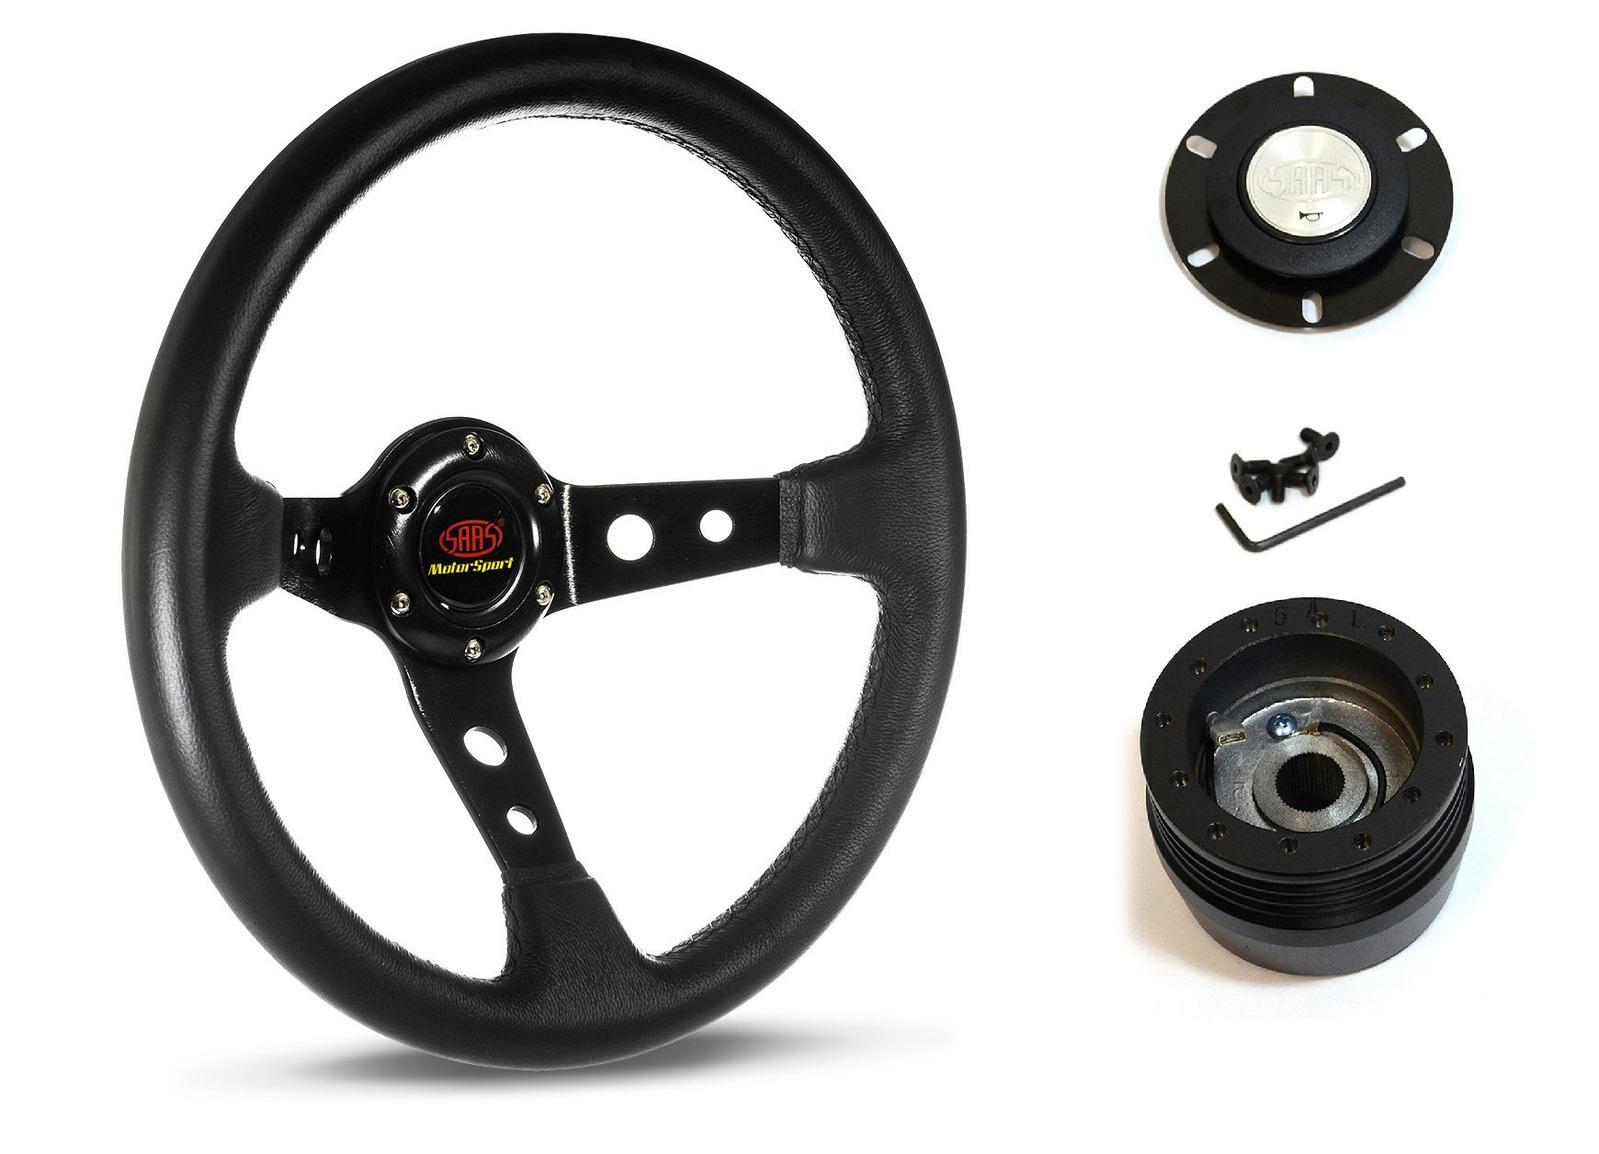 SAAS Steering Wheel Leather 14" ADR GT Deep Dish Black With Holes SWGT3 and SAAS boss kit for Suzuki Hatch - Carry Van -Mighty Boy 1984-1989